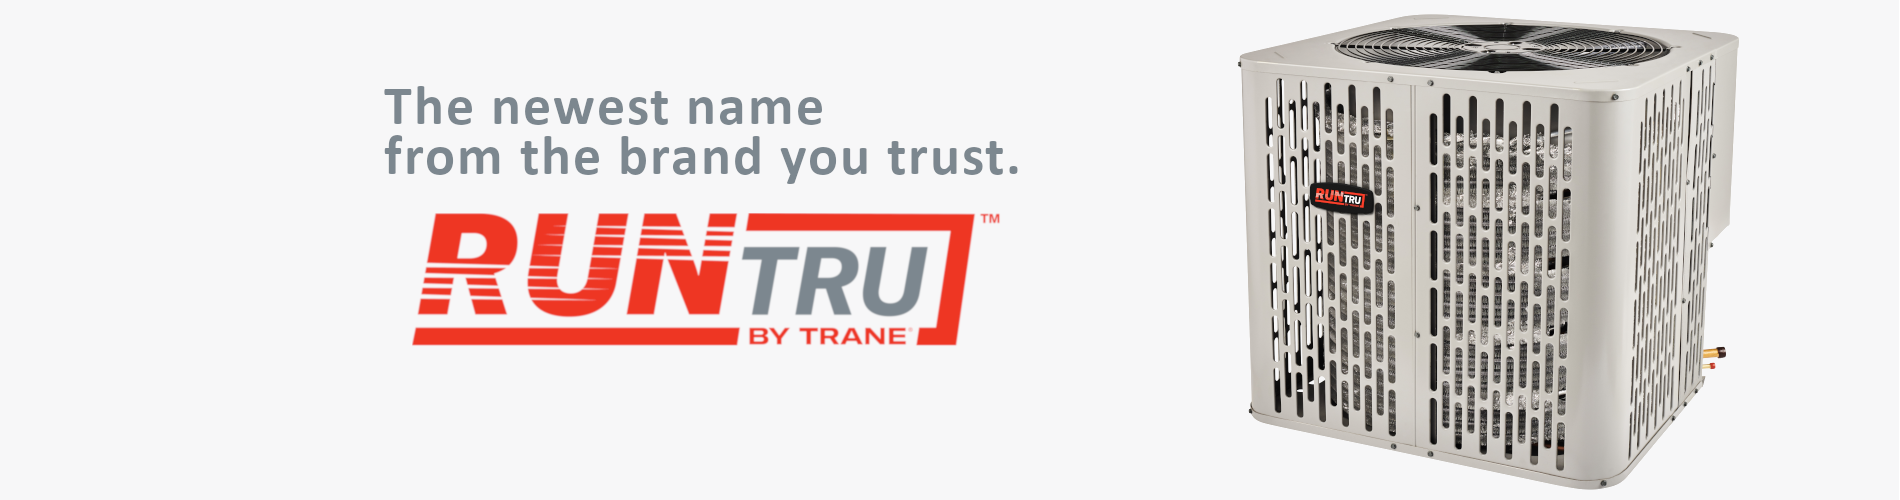 RunTru, the newest name from the brand you trust.